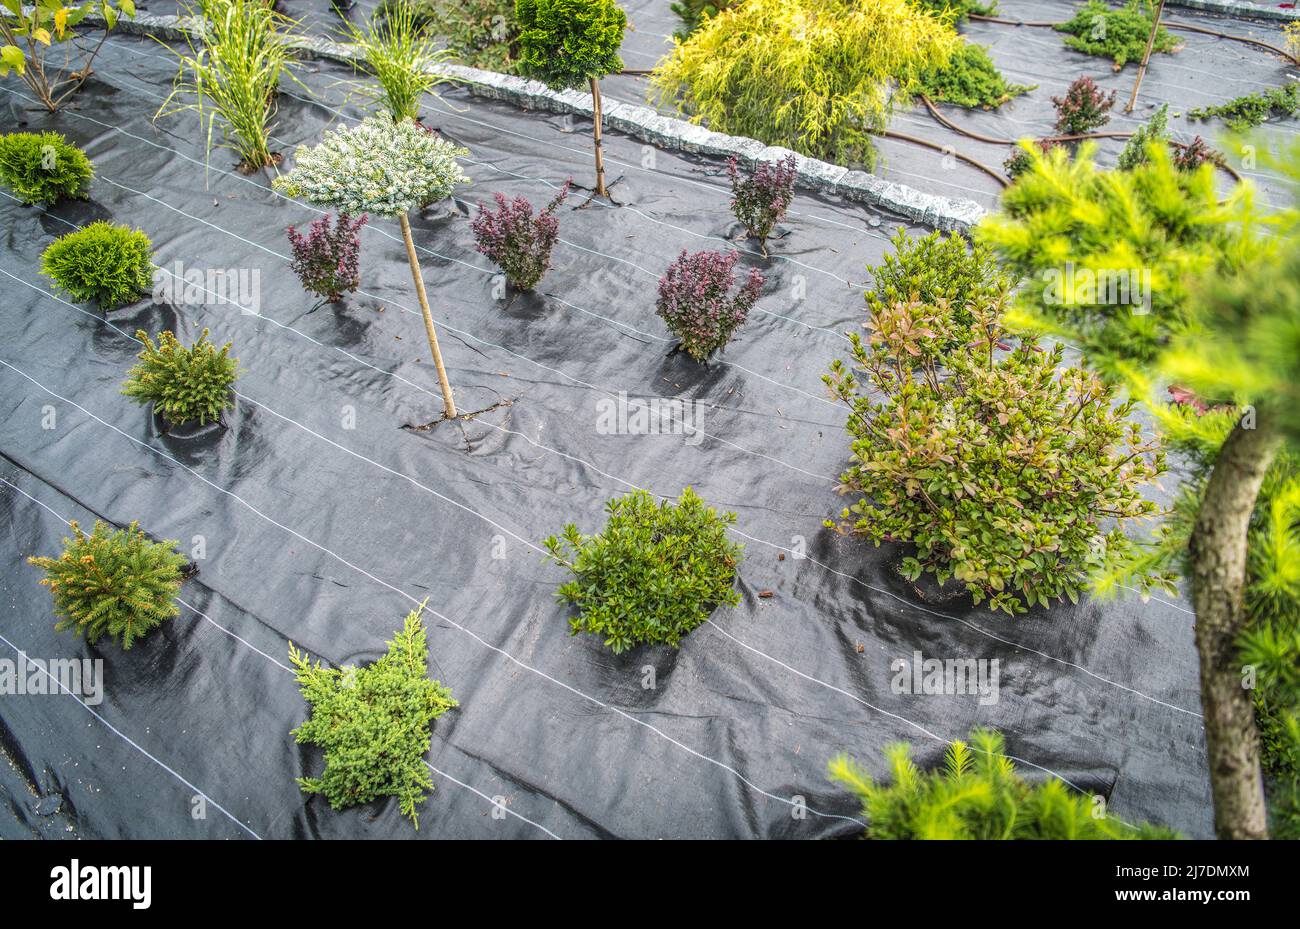 Weed Control Fabric In the Newly Created Backyard Garden. Drip Irrigation System in the Background. Landscaping Industry Theme. Stock Photo